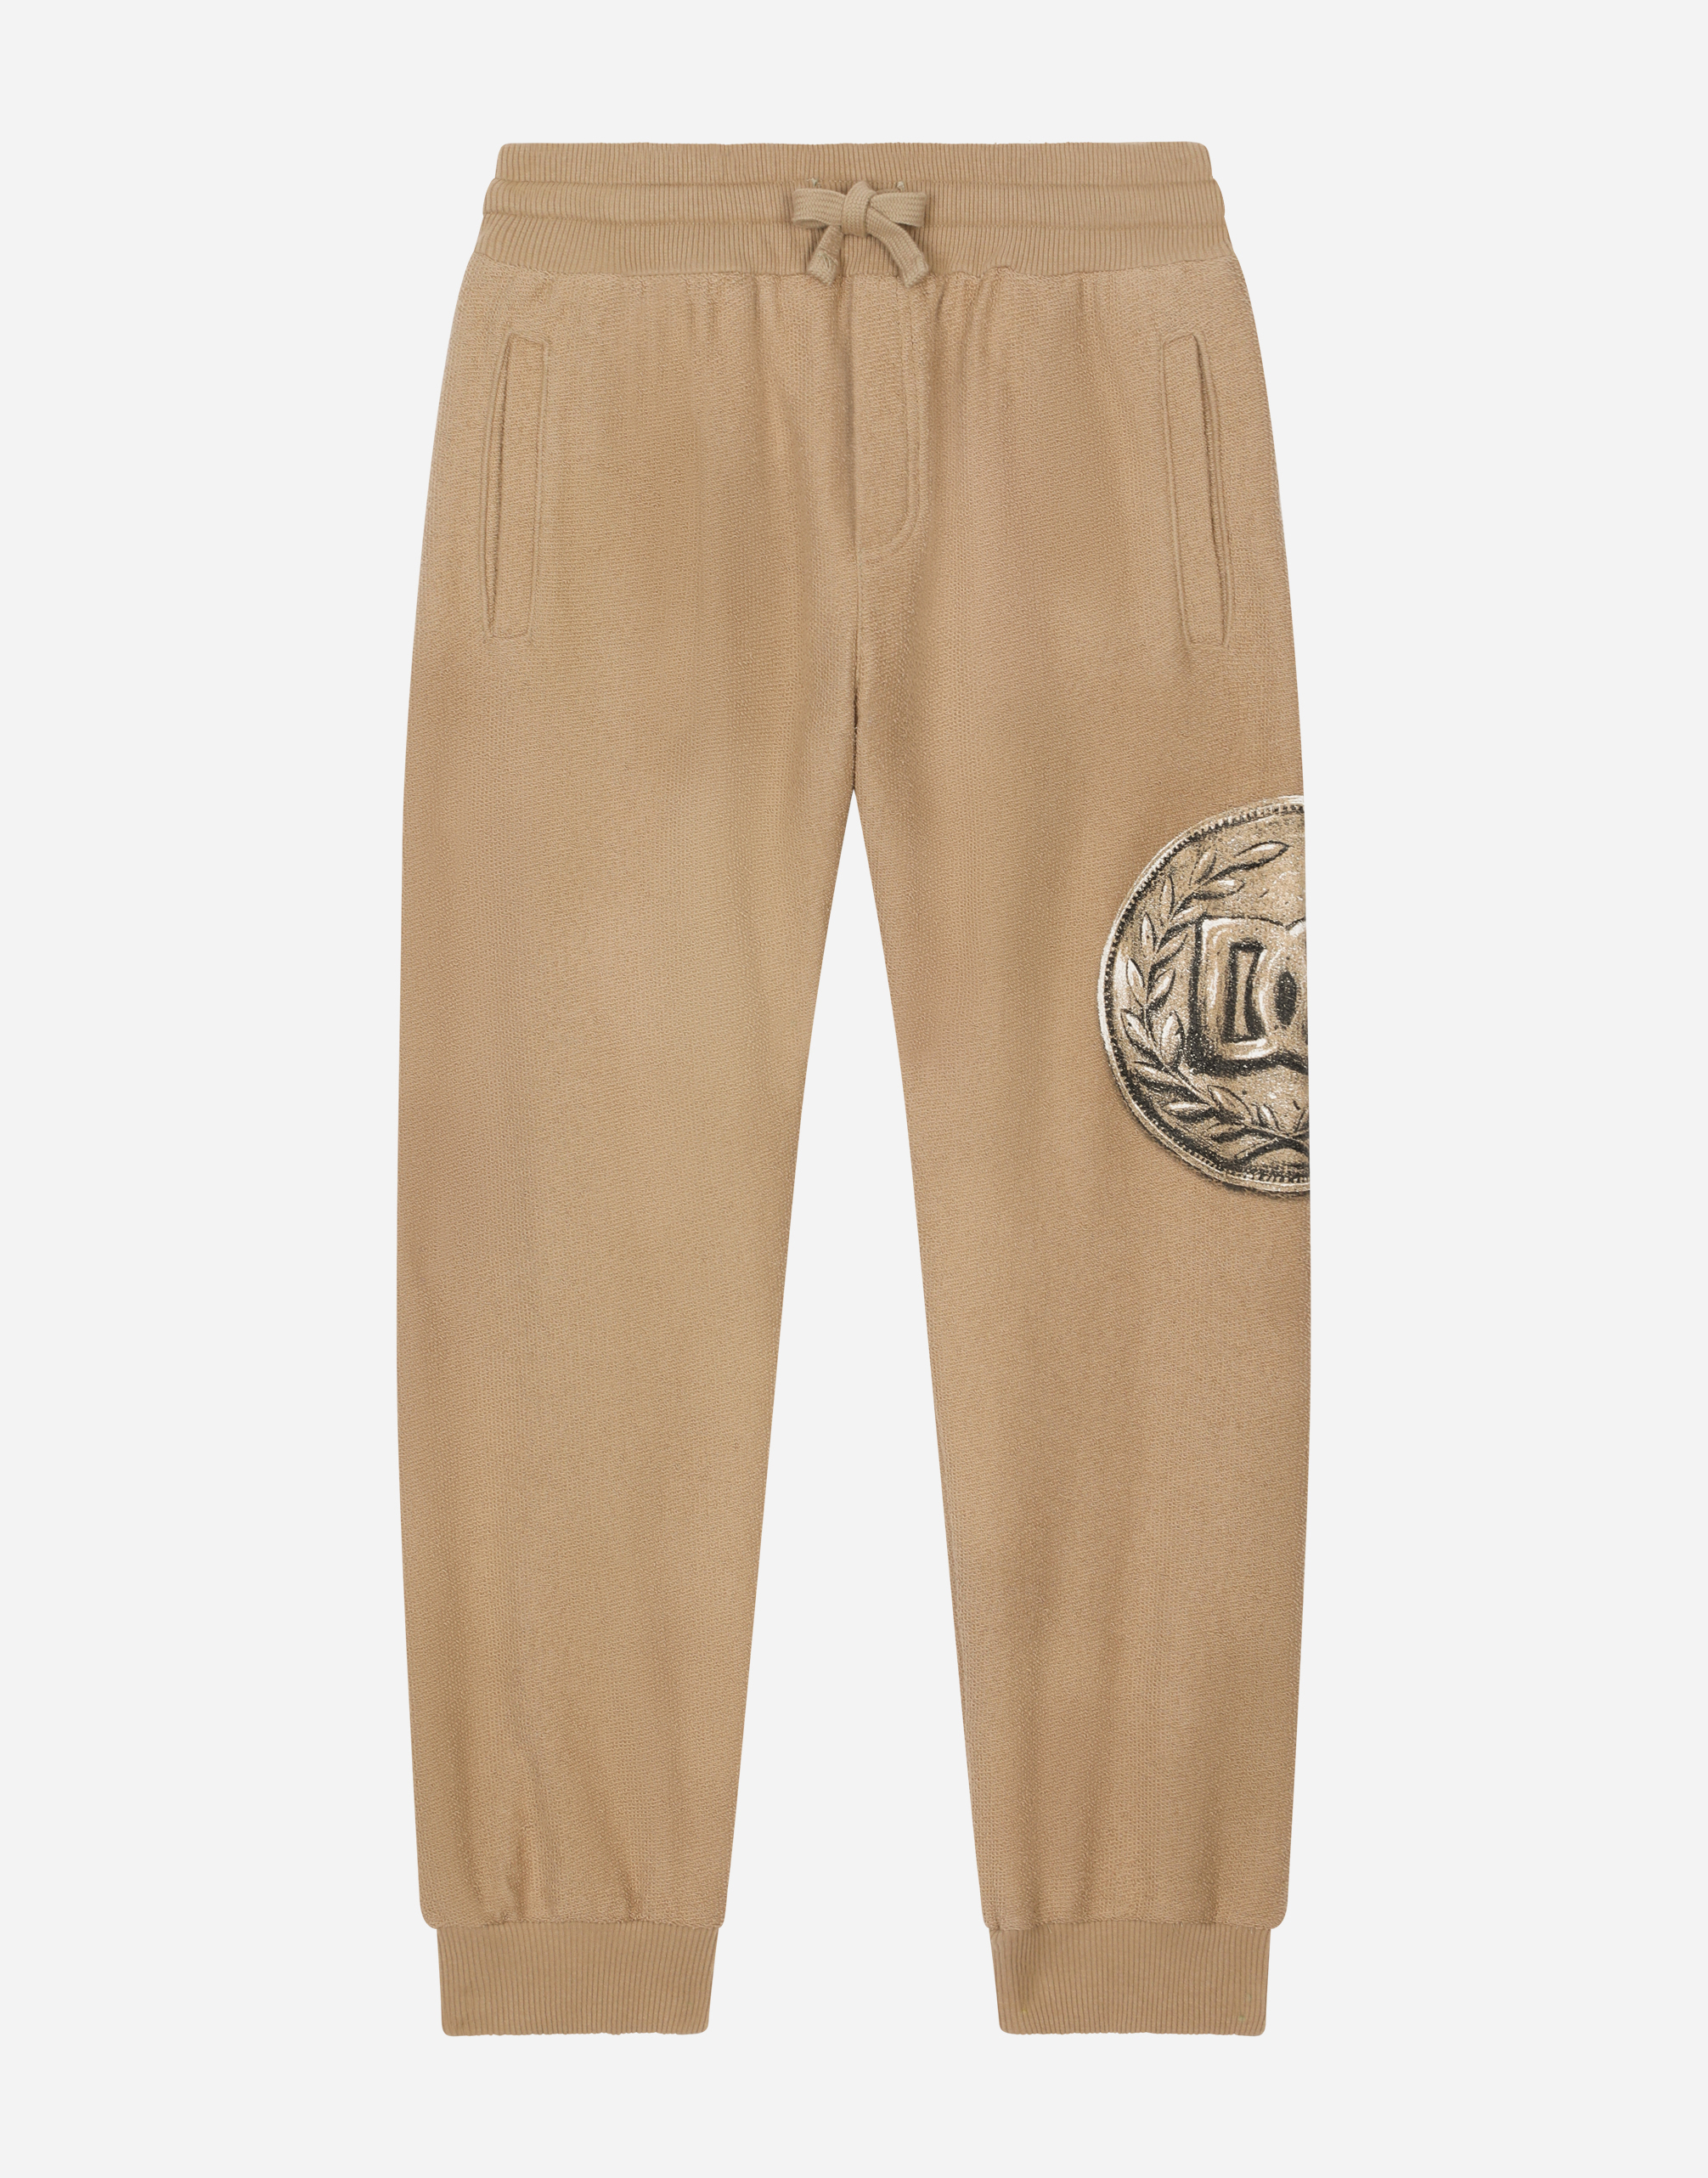 Dolce & Gabbana Cotton Jogging Pants With Coin Print In Beige